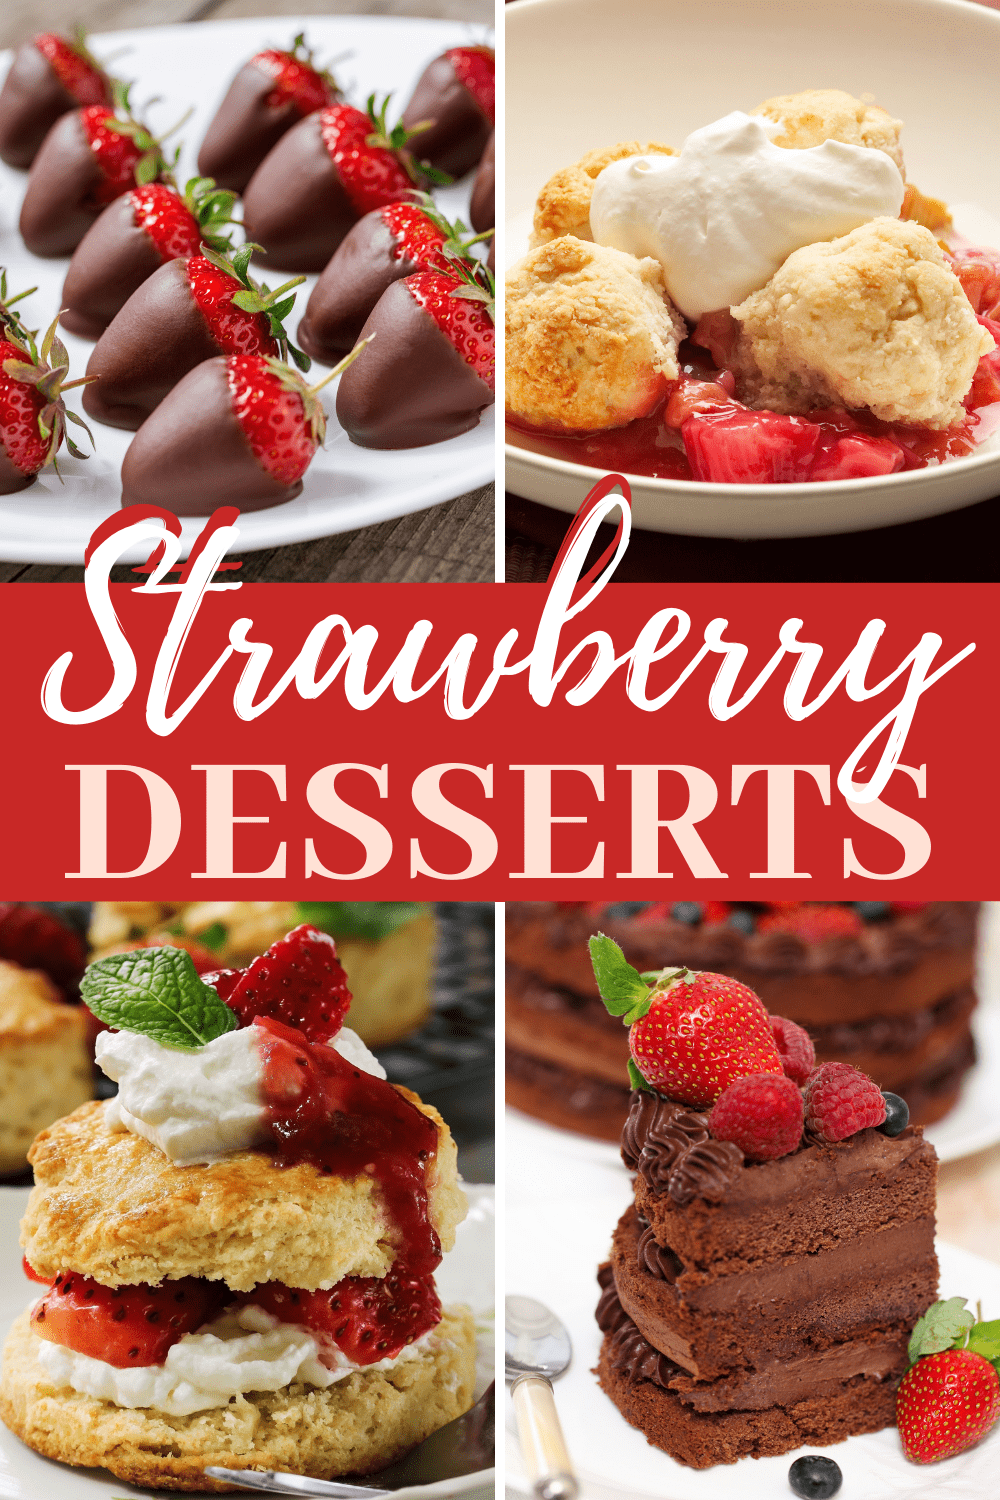 24 Best Strawberry Desserts (+ Easy Recipes) - Insanely Good